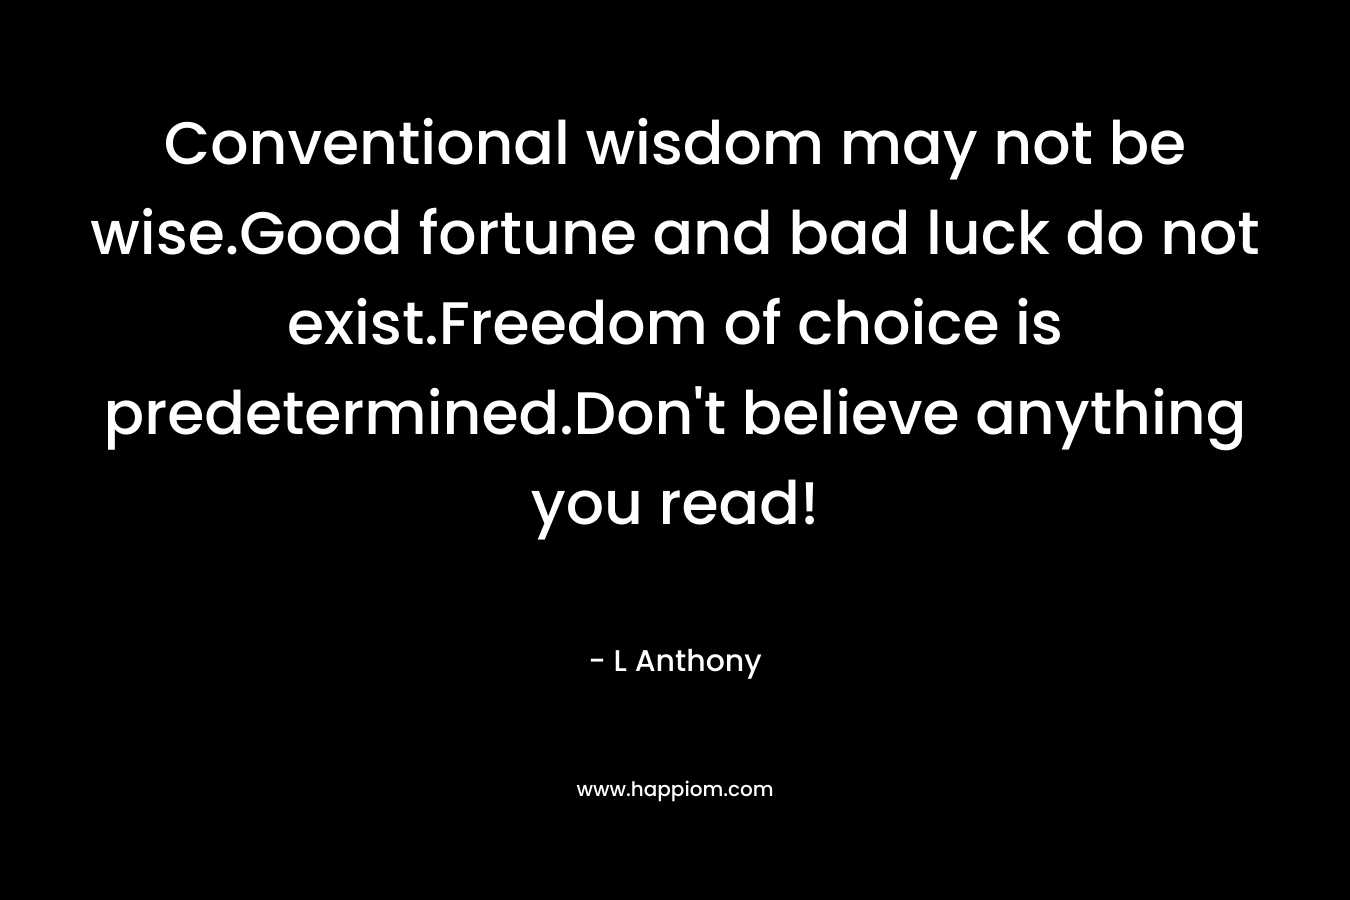 Conventional wisdom may not be wise.Good fortune and bad luck do not exist.Freedom of choice is predetermined.Don't believe anything you read!